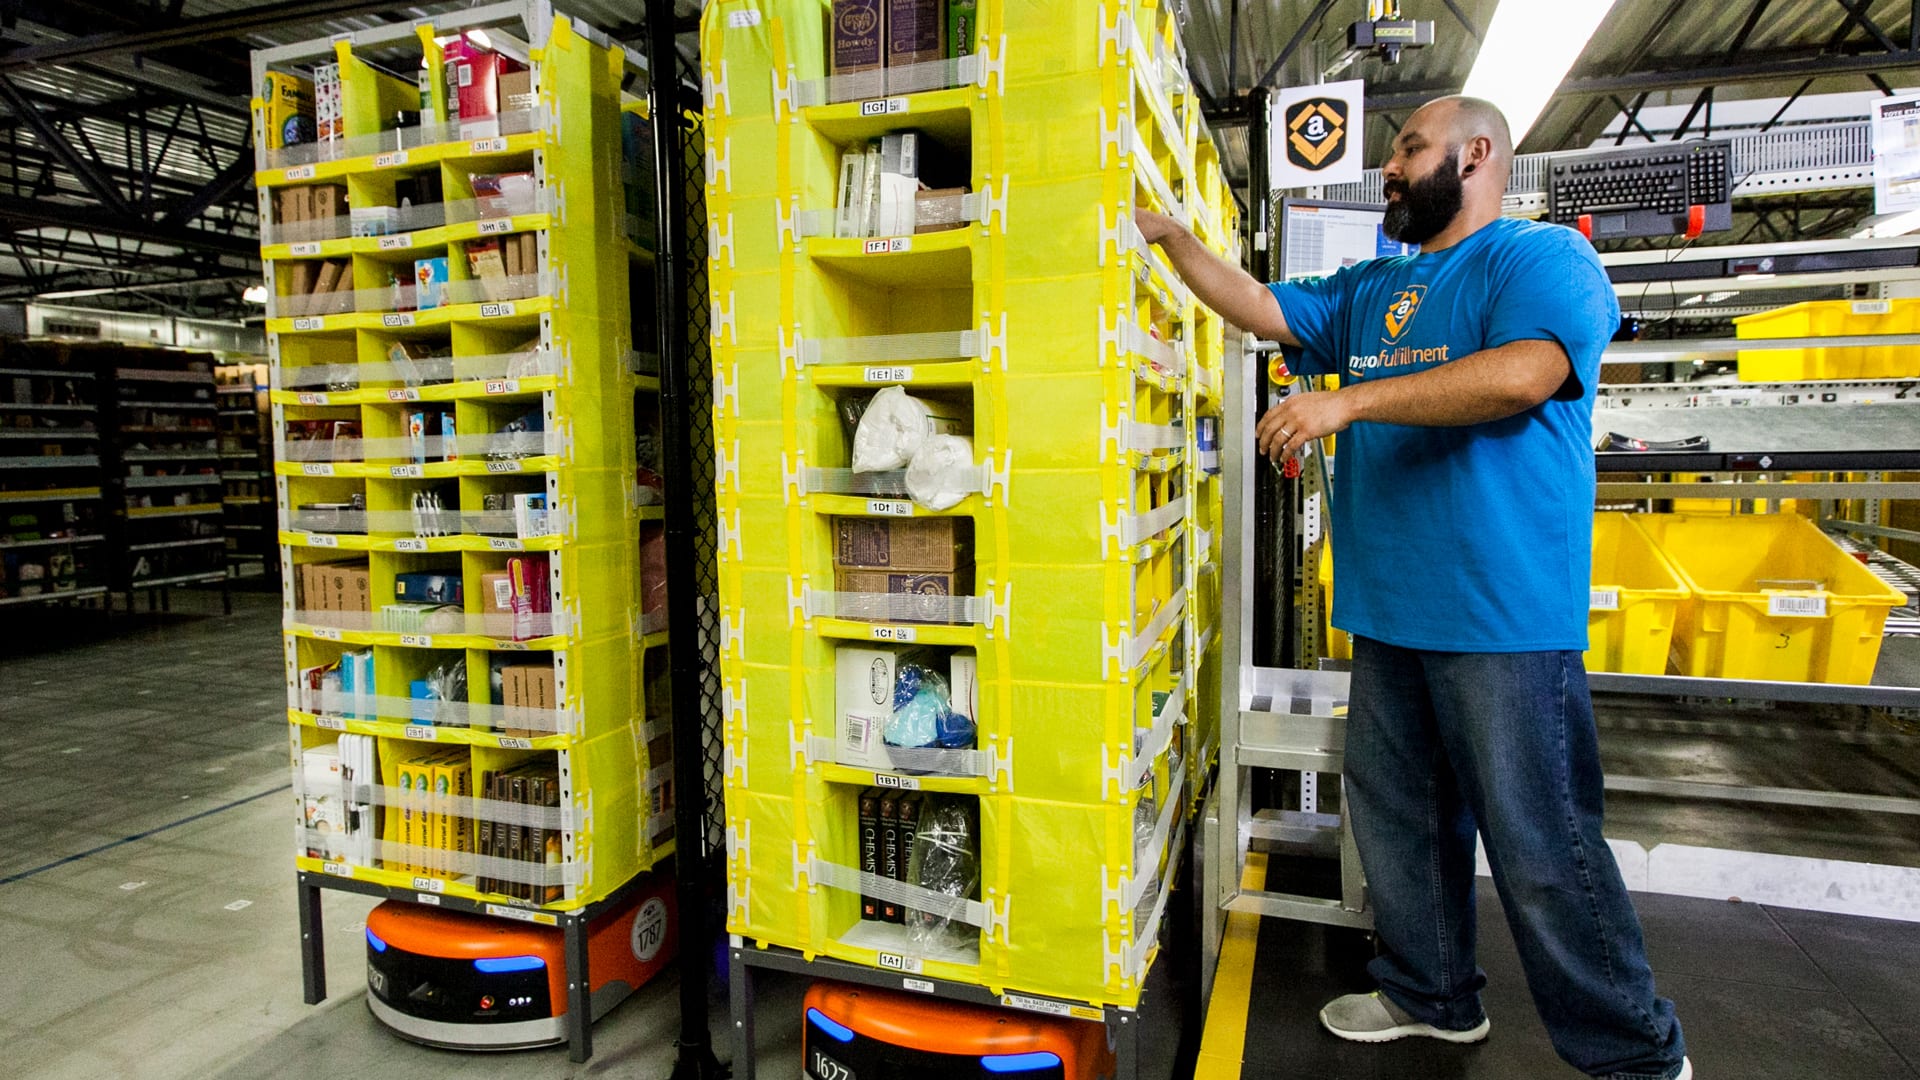 Amazon is going to train 100,000 workers in these 6 areas of tech